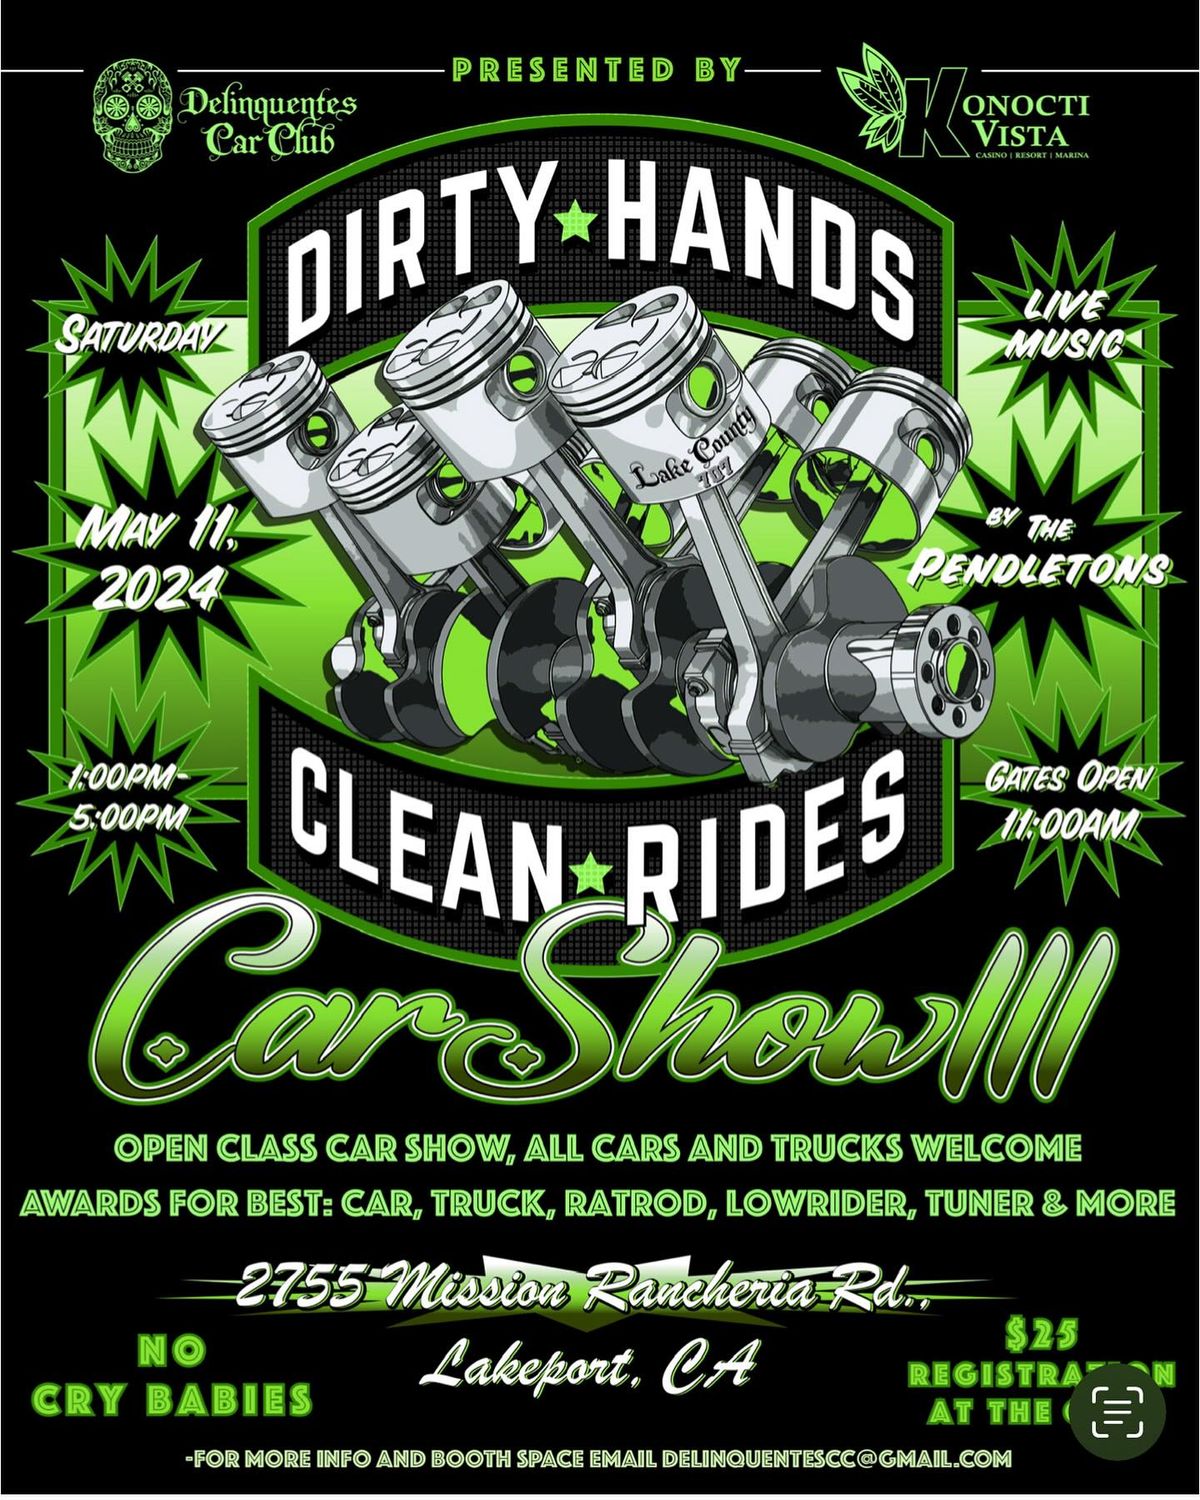 Dirty Hands Clean Rides 3 - Car Show with Live Music by The Pendletons